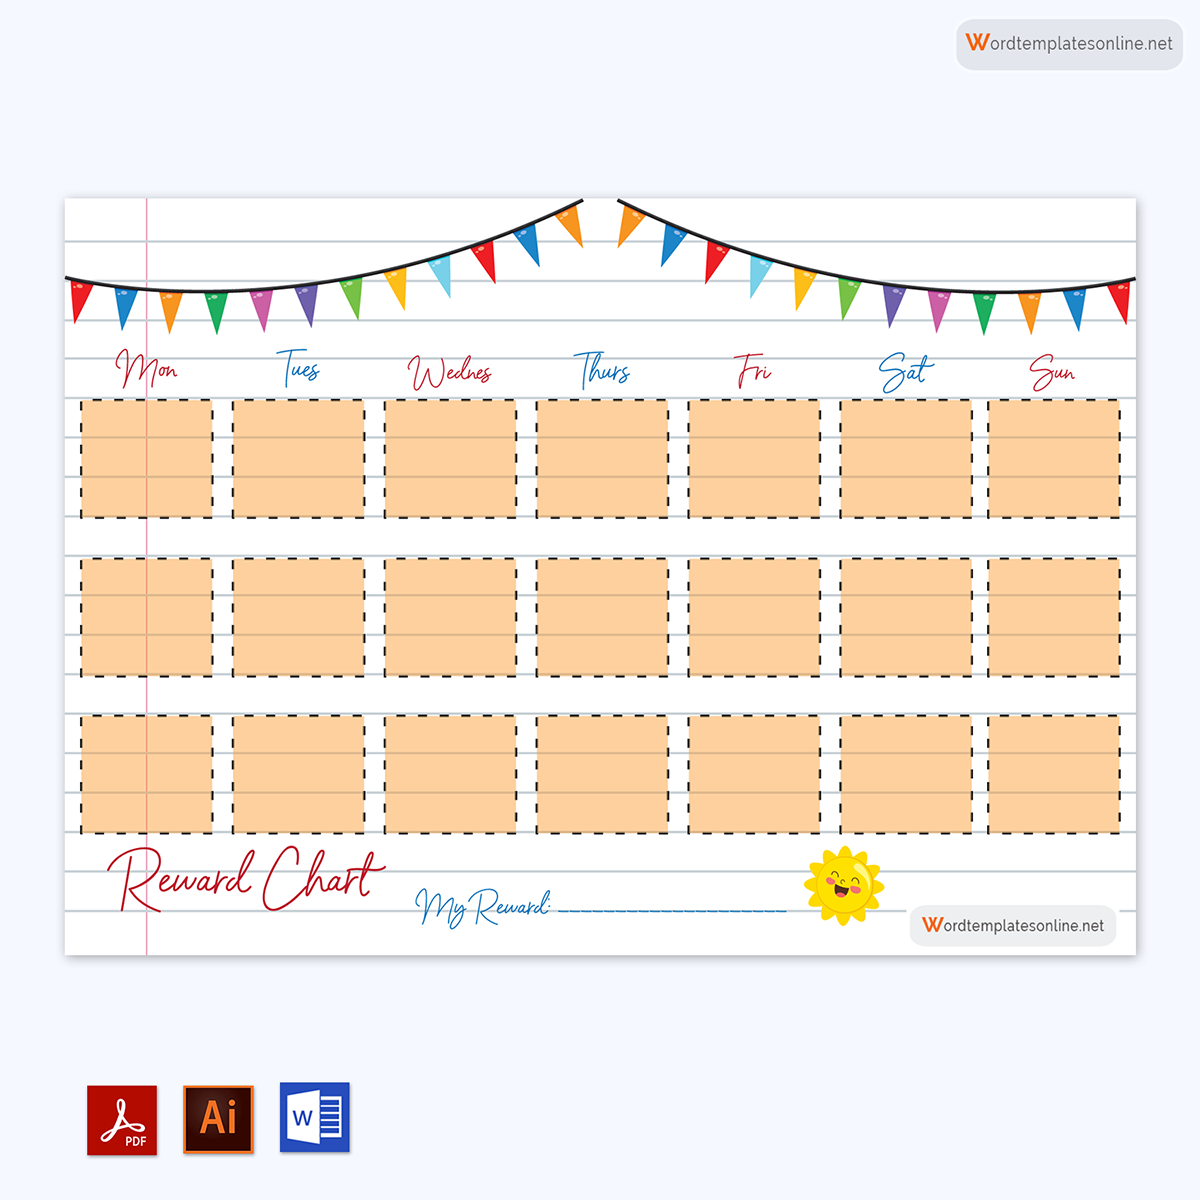 Example of Reward Chart for Kids - Editable Template